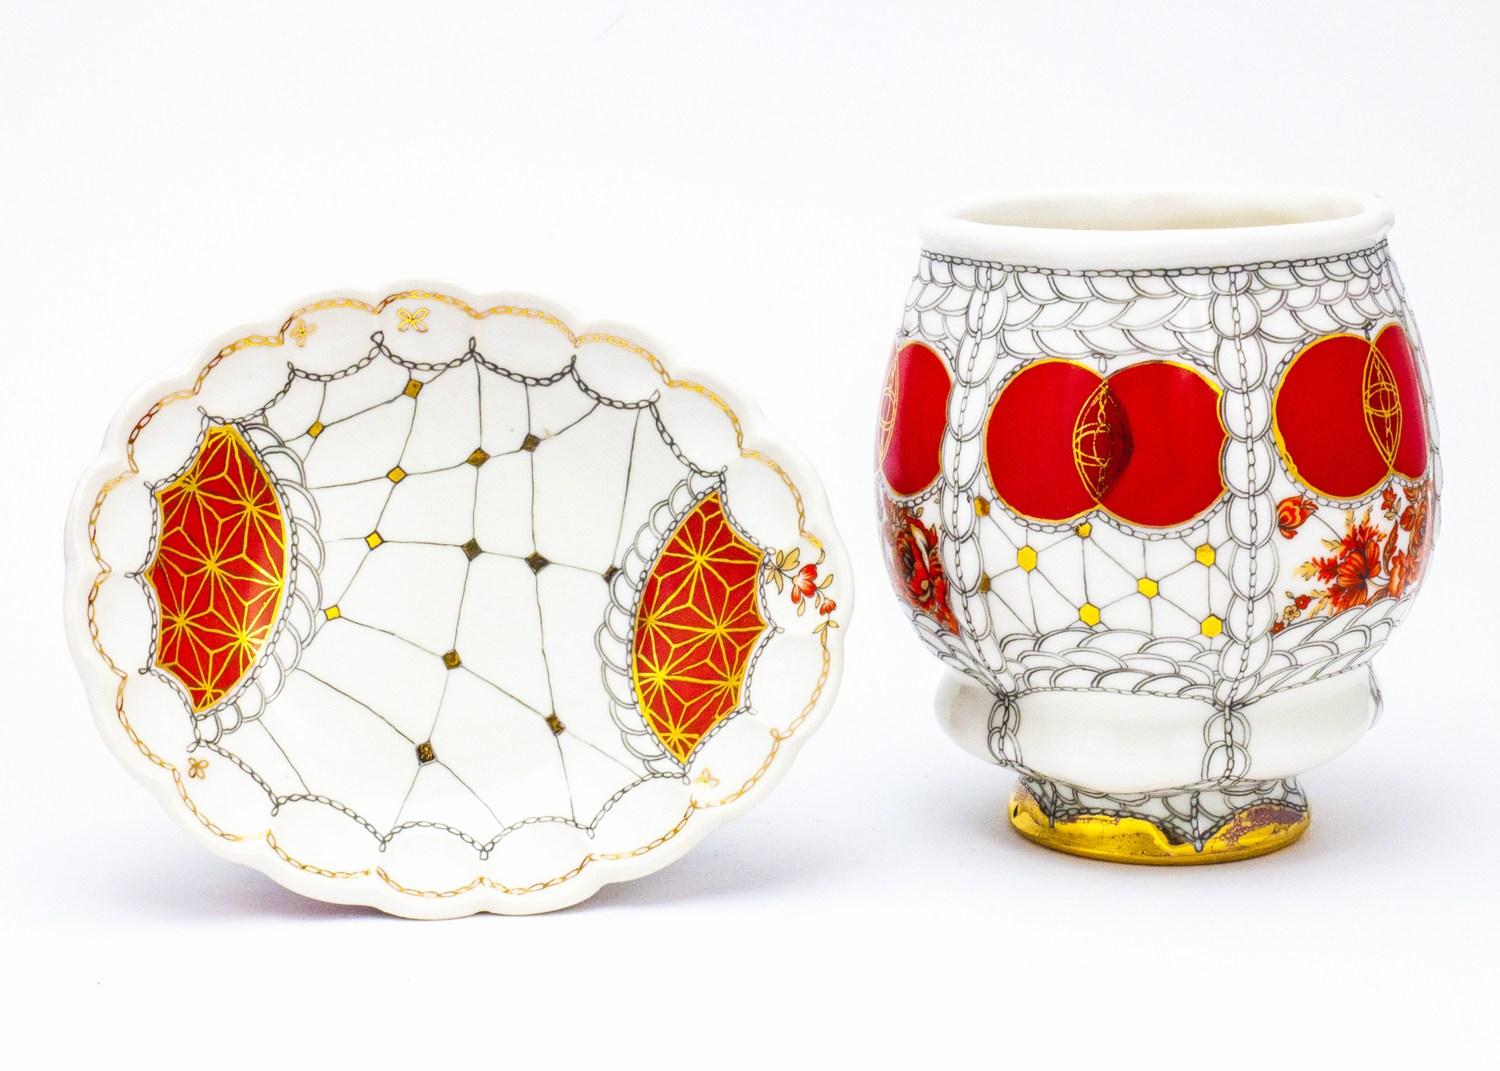 

Cup with Saucer Set “Red”

Materials Used: Porcelain, Glaze, China Paint, Gold Luster, Decals

Year: 2018

Height: 5″

Width: 5″

Depth: 3.75″

One-of-a-kind ceramics work, completely handmade and handpainted, by Melanie Sherman. I make all of my